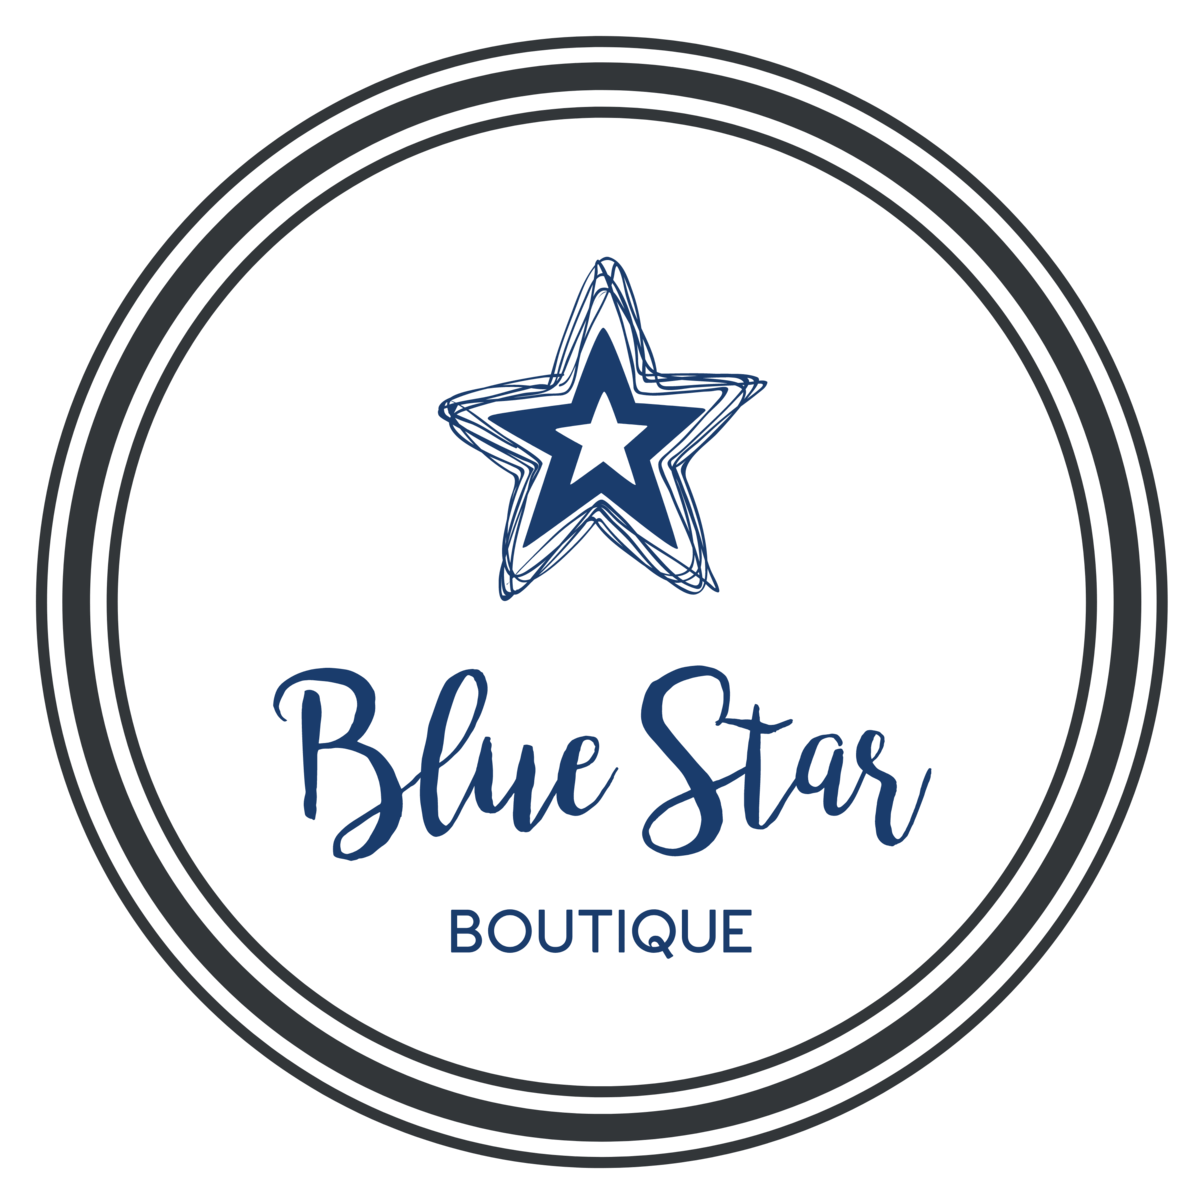 Blue Star in Circle Logo - Blue Star Boutique | Women's Boutique Clothing